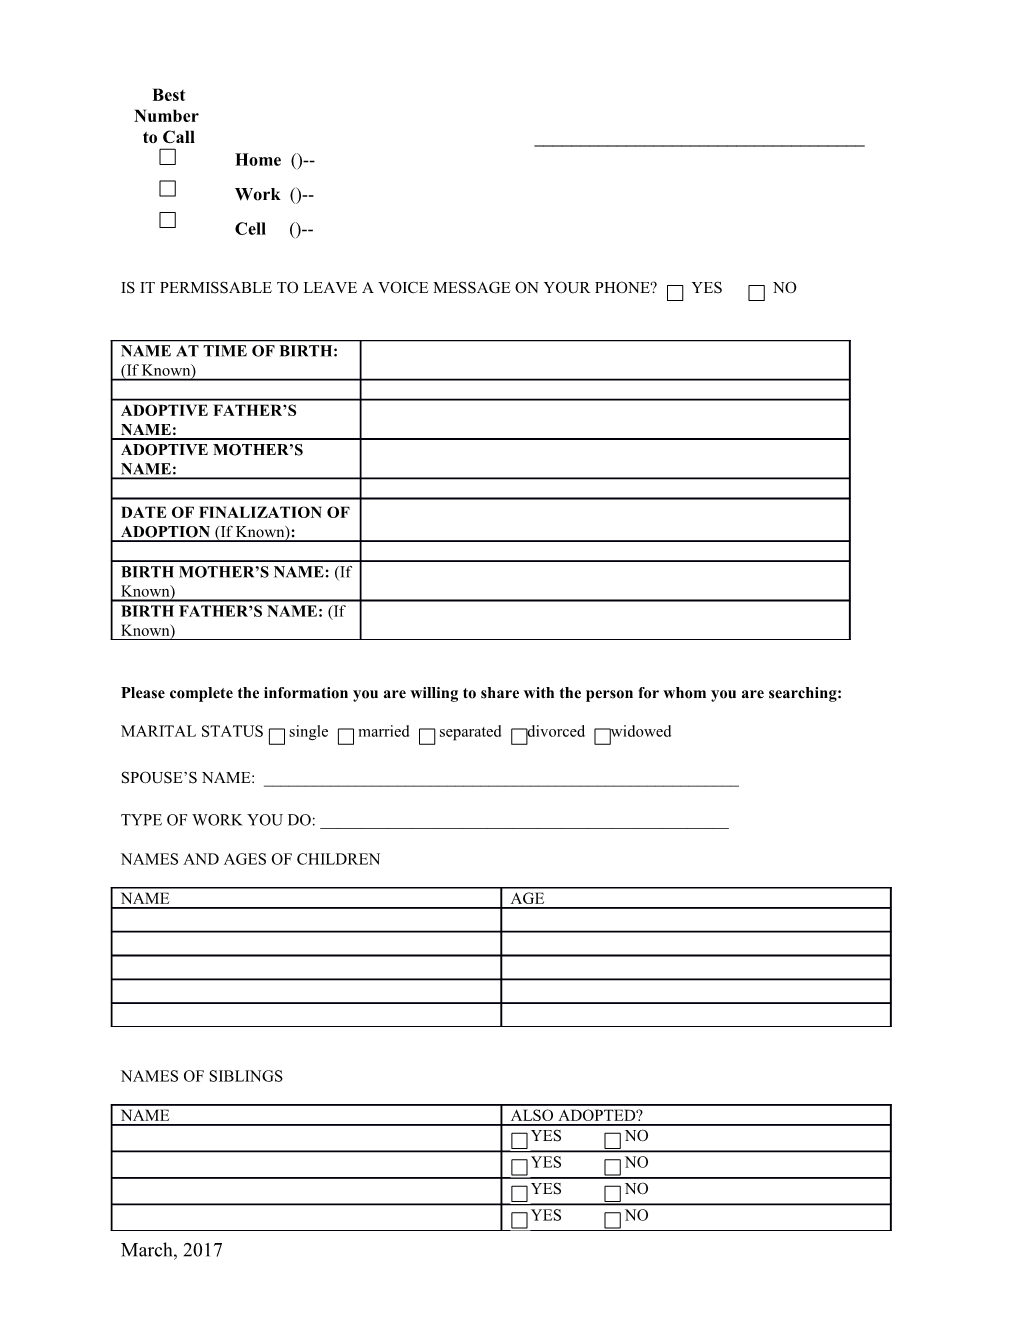 Request for Information Form